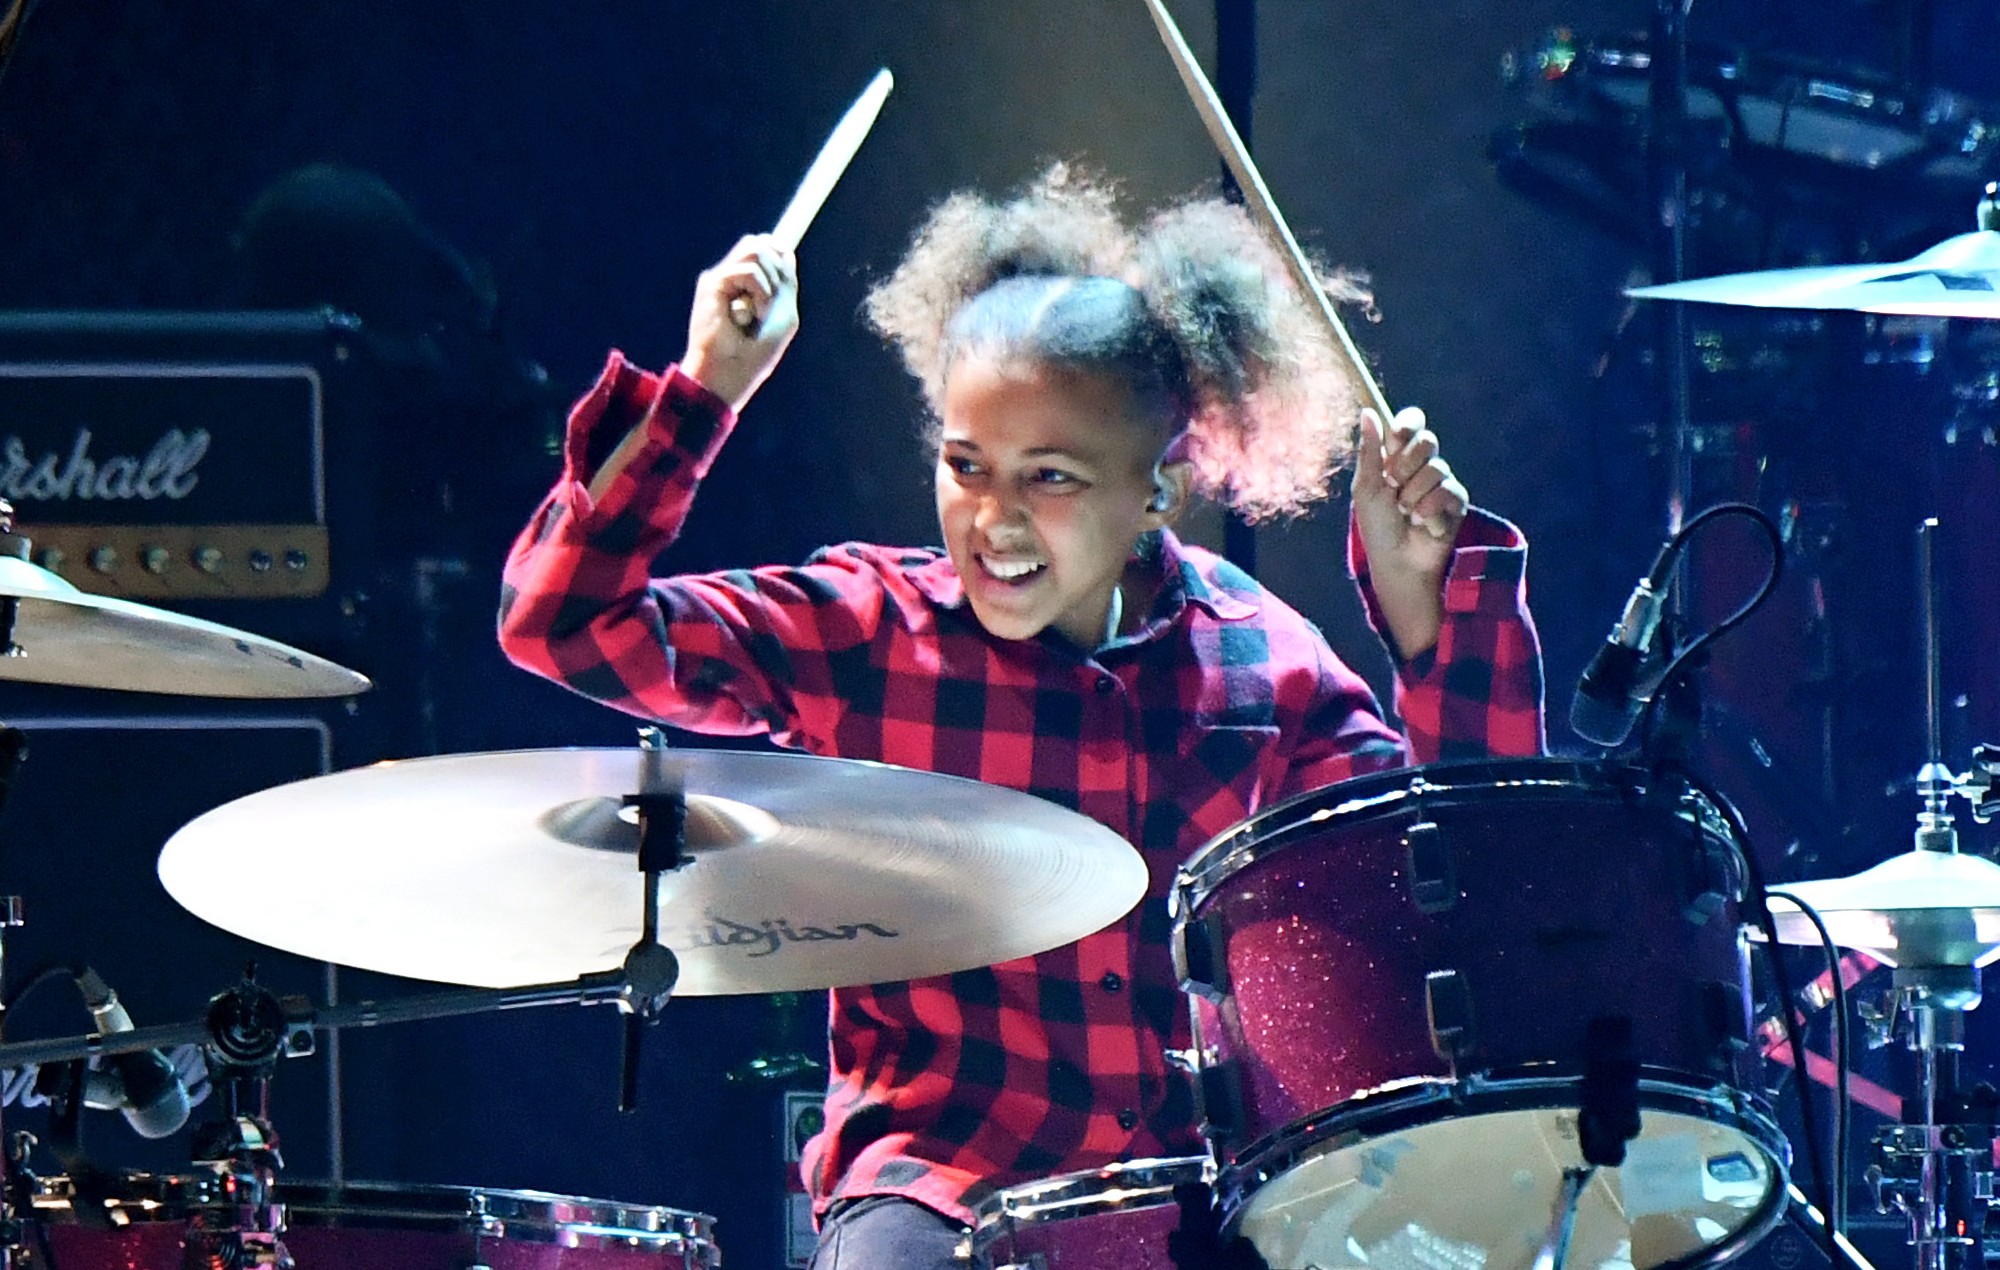 Watch Nandi Bushell perform a rock medley at the O2 in front of 20,000 people